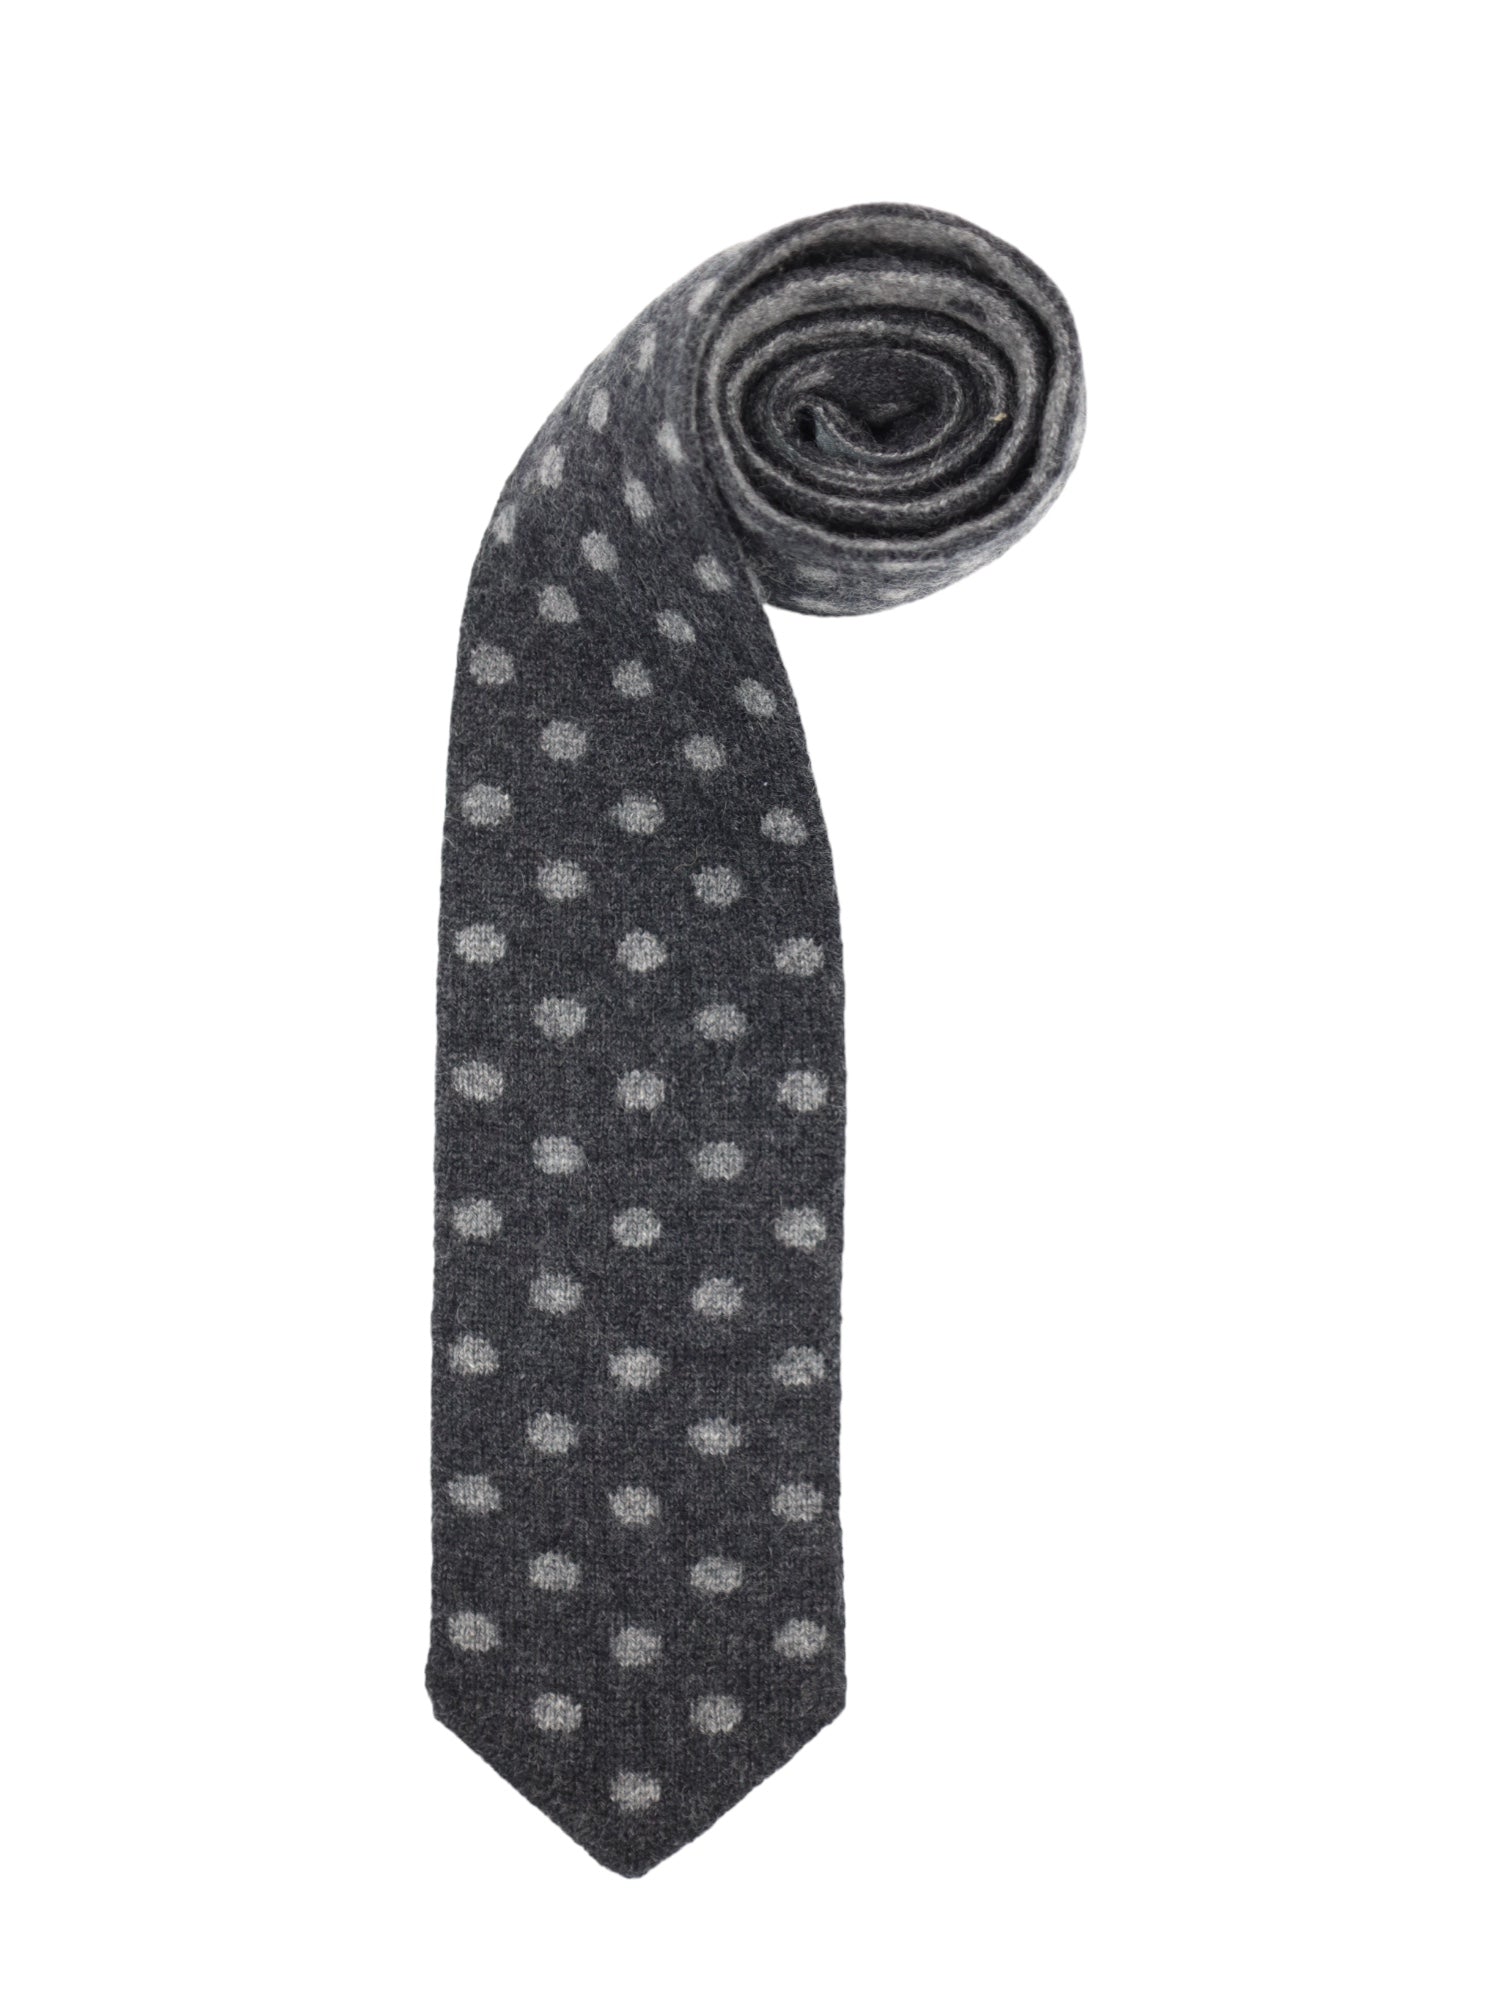 Kiton Anthracite & Grey Reversible Knitted Cashmere Tie